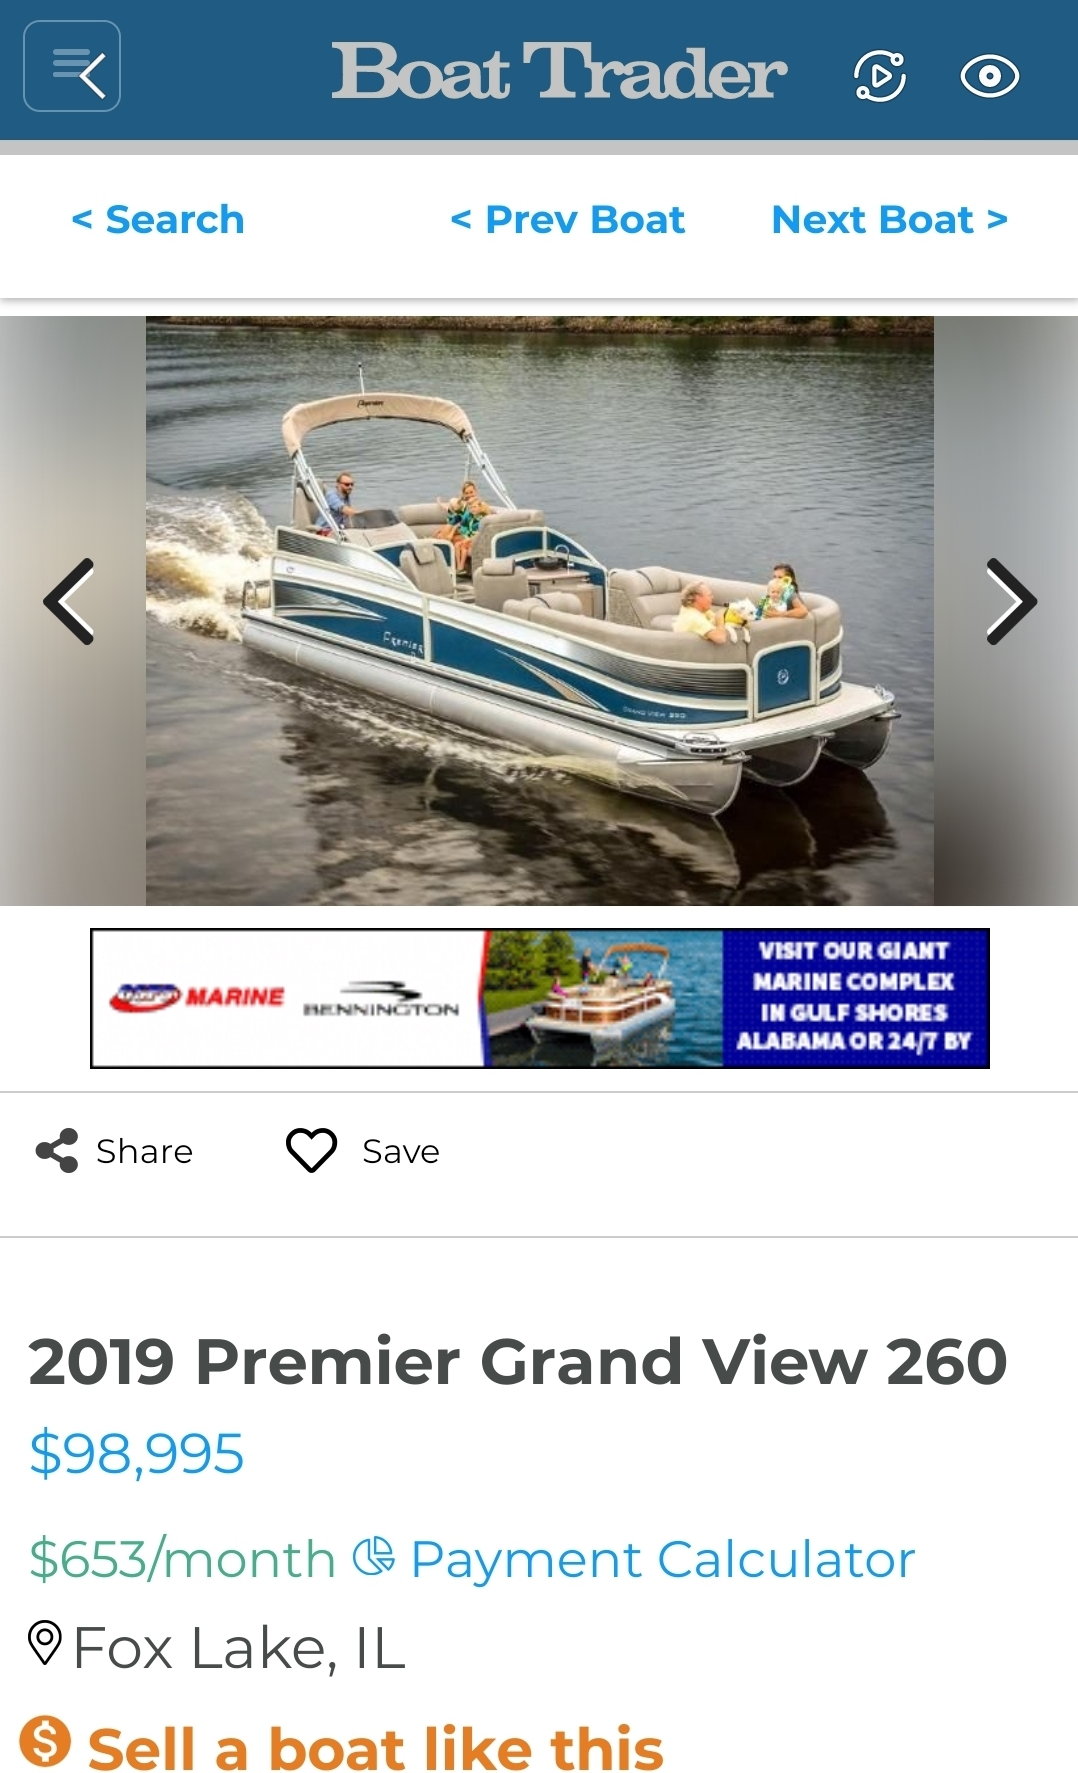 100k pontoon Is this for real? - The Hull Truth - Boating and